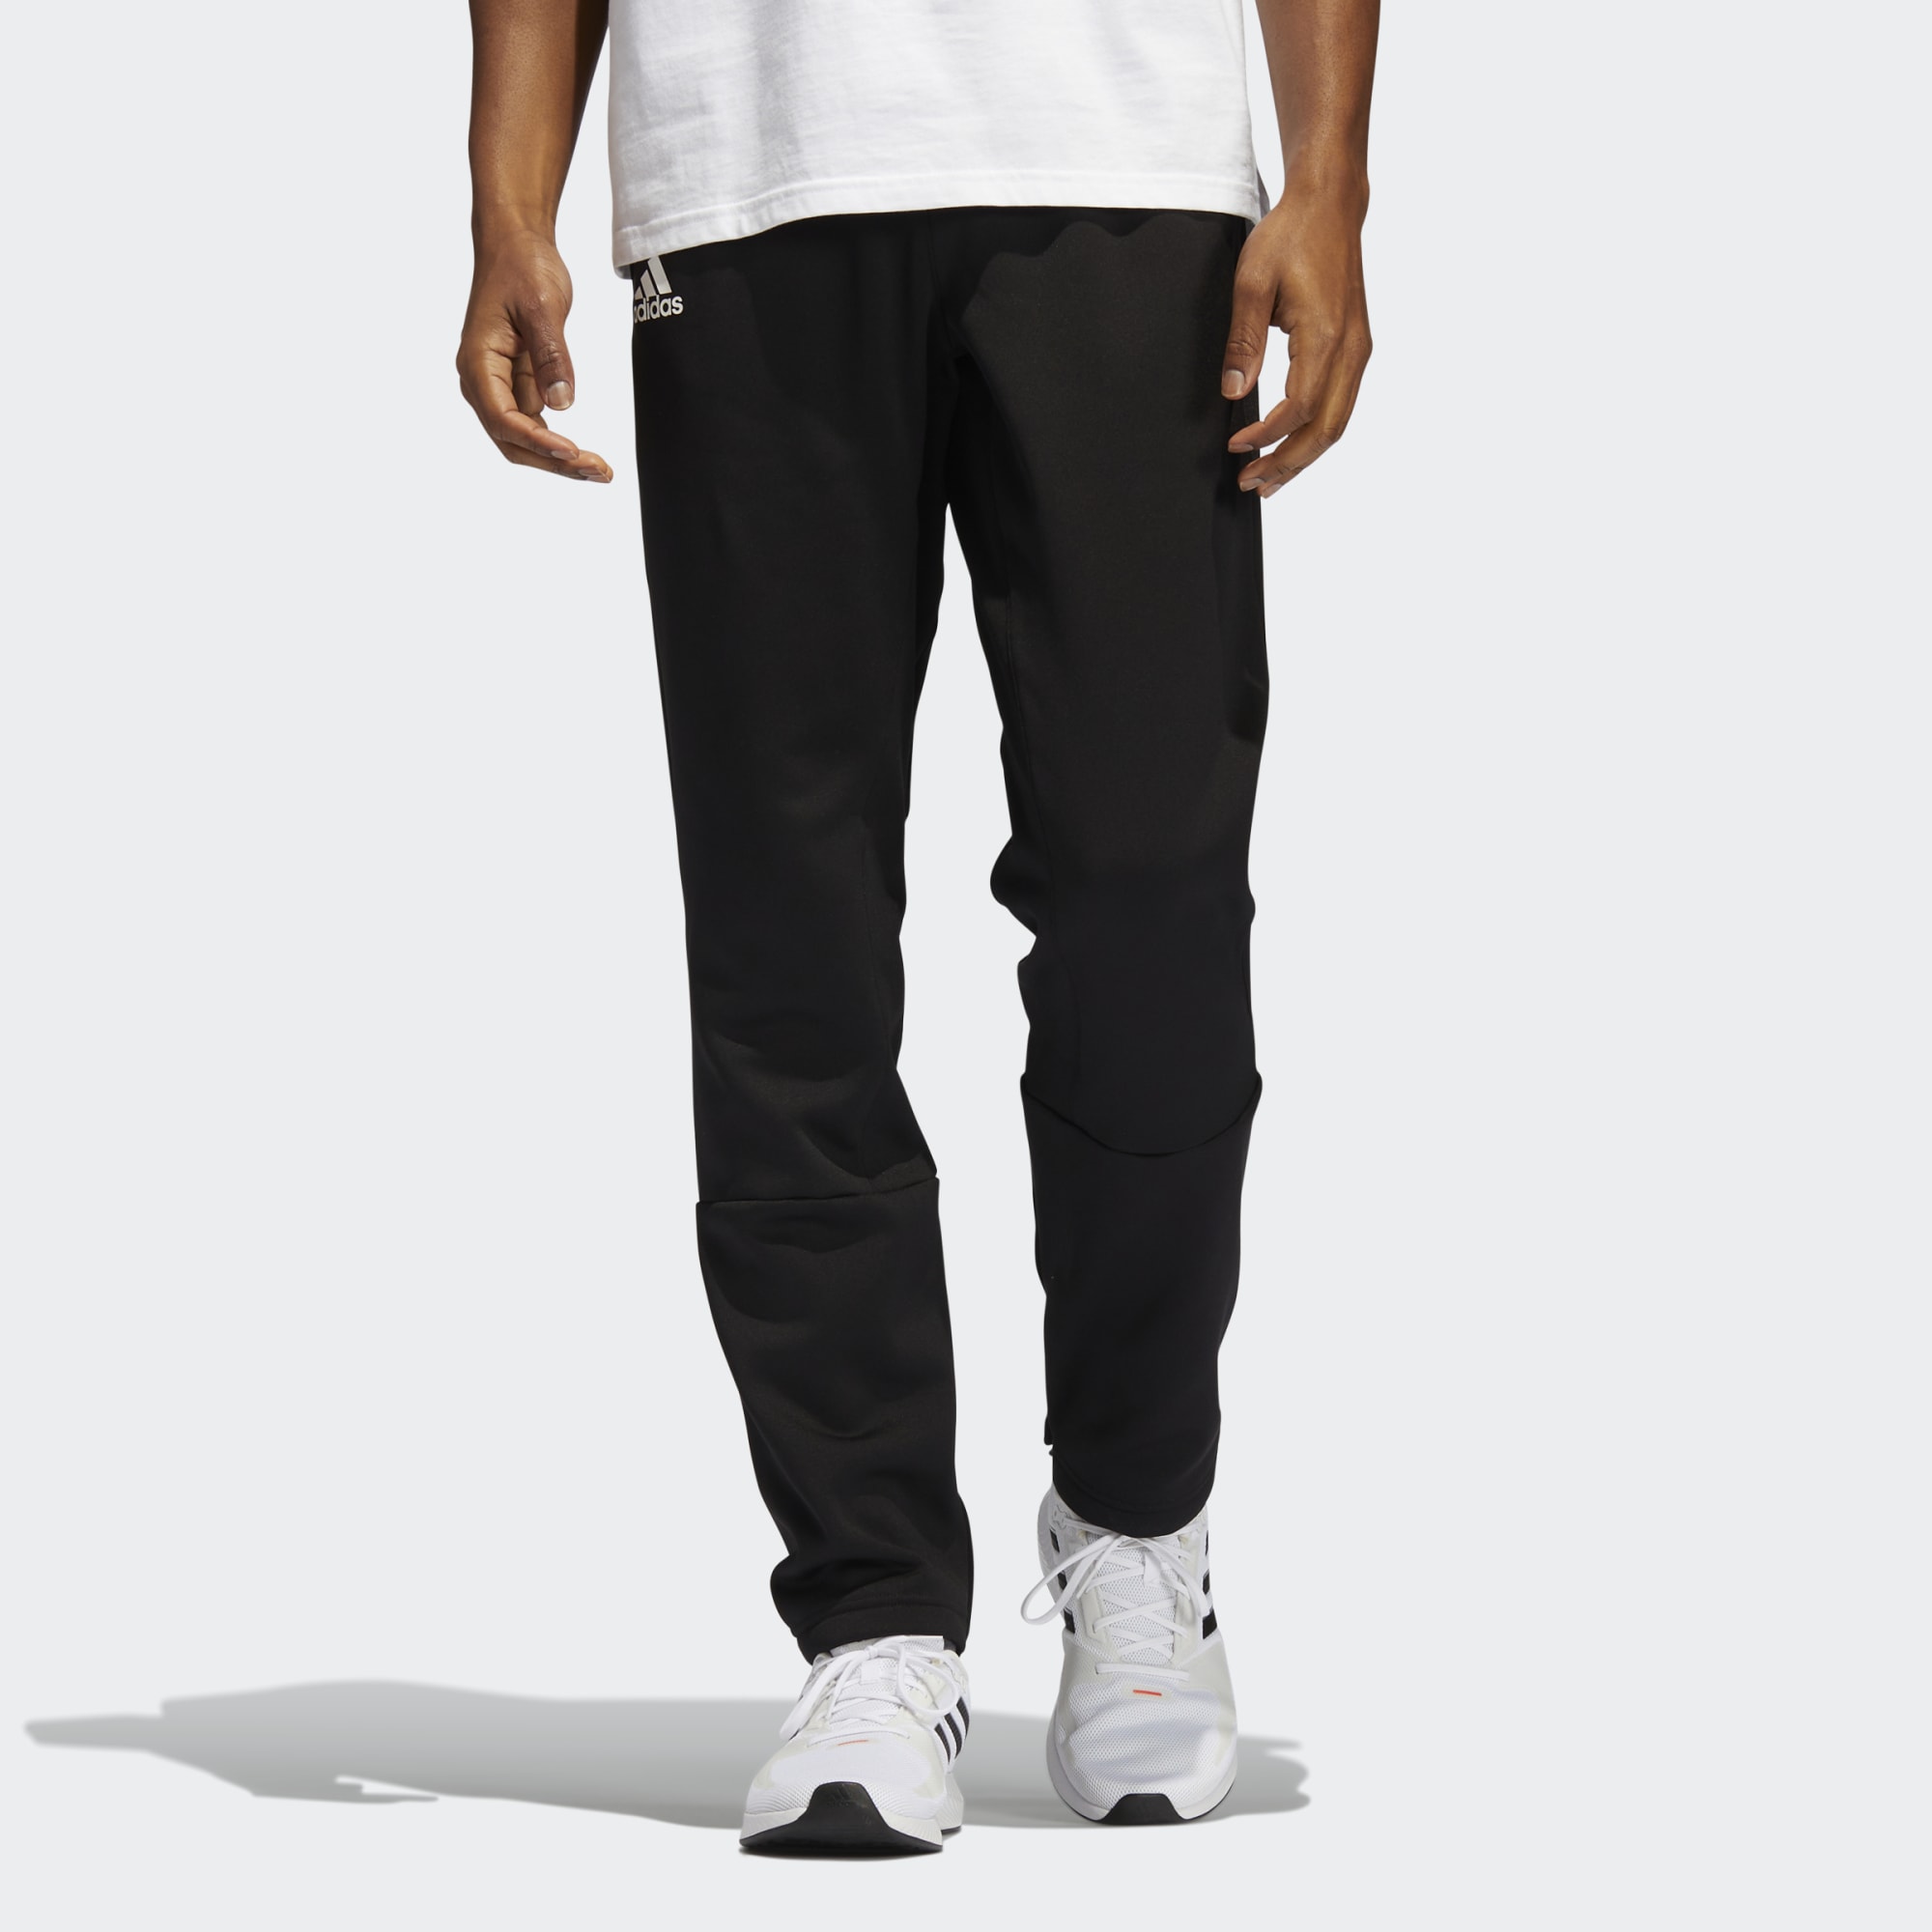 adidas Team Issue Tapered Men's Pants